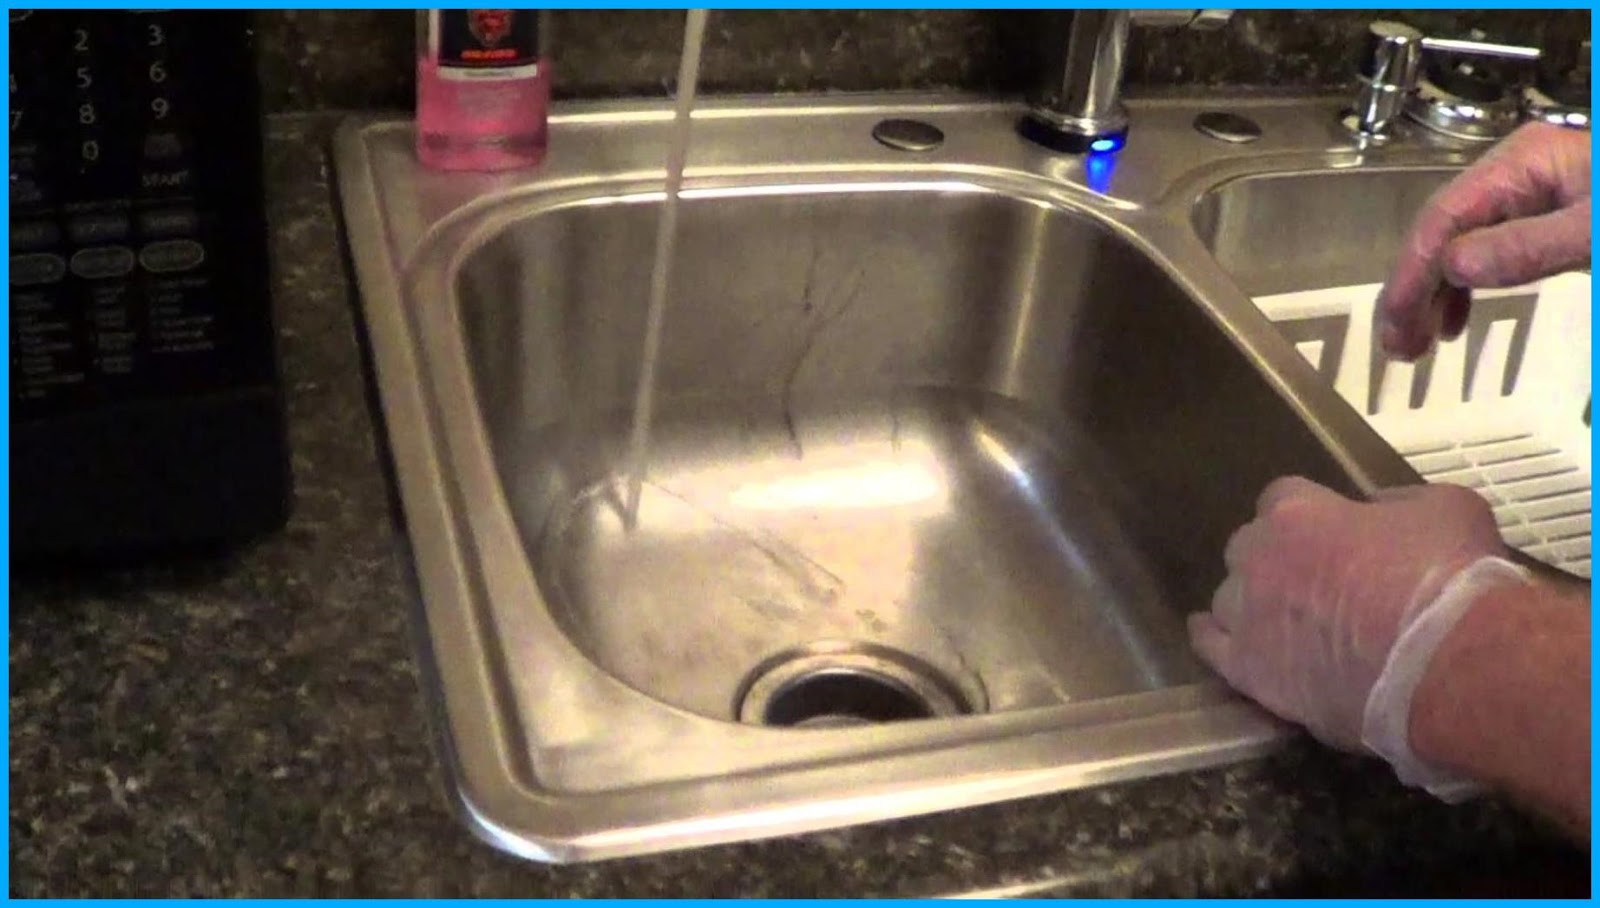 16 Fix Clogged Kitchen Sink With Disposal Unclog a Kitchen Sink Fix,Clogged,Kitchen,Sink,Disposal